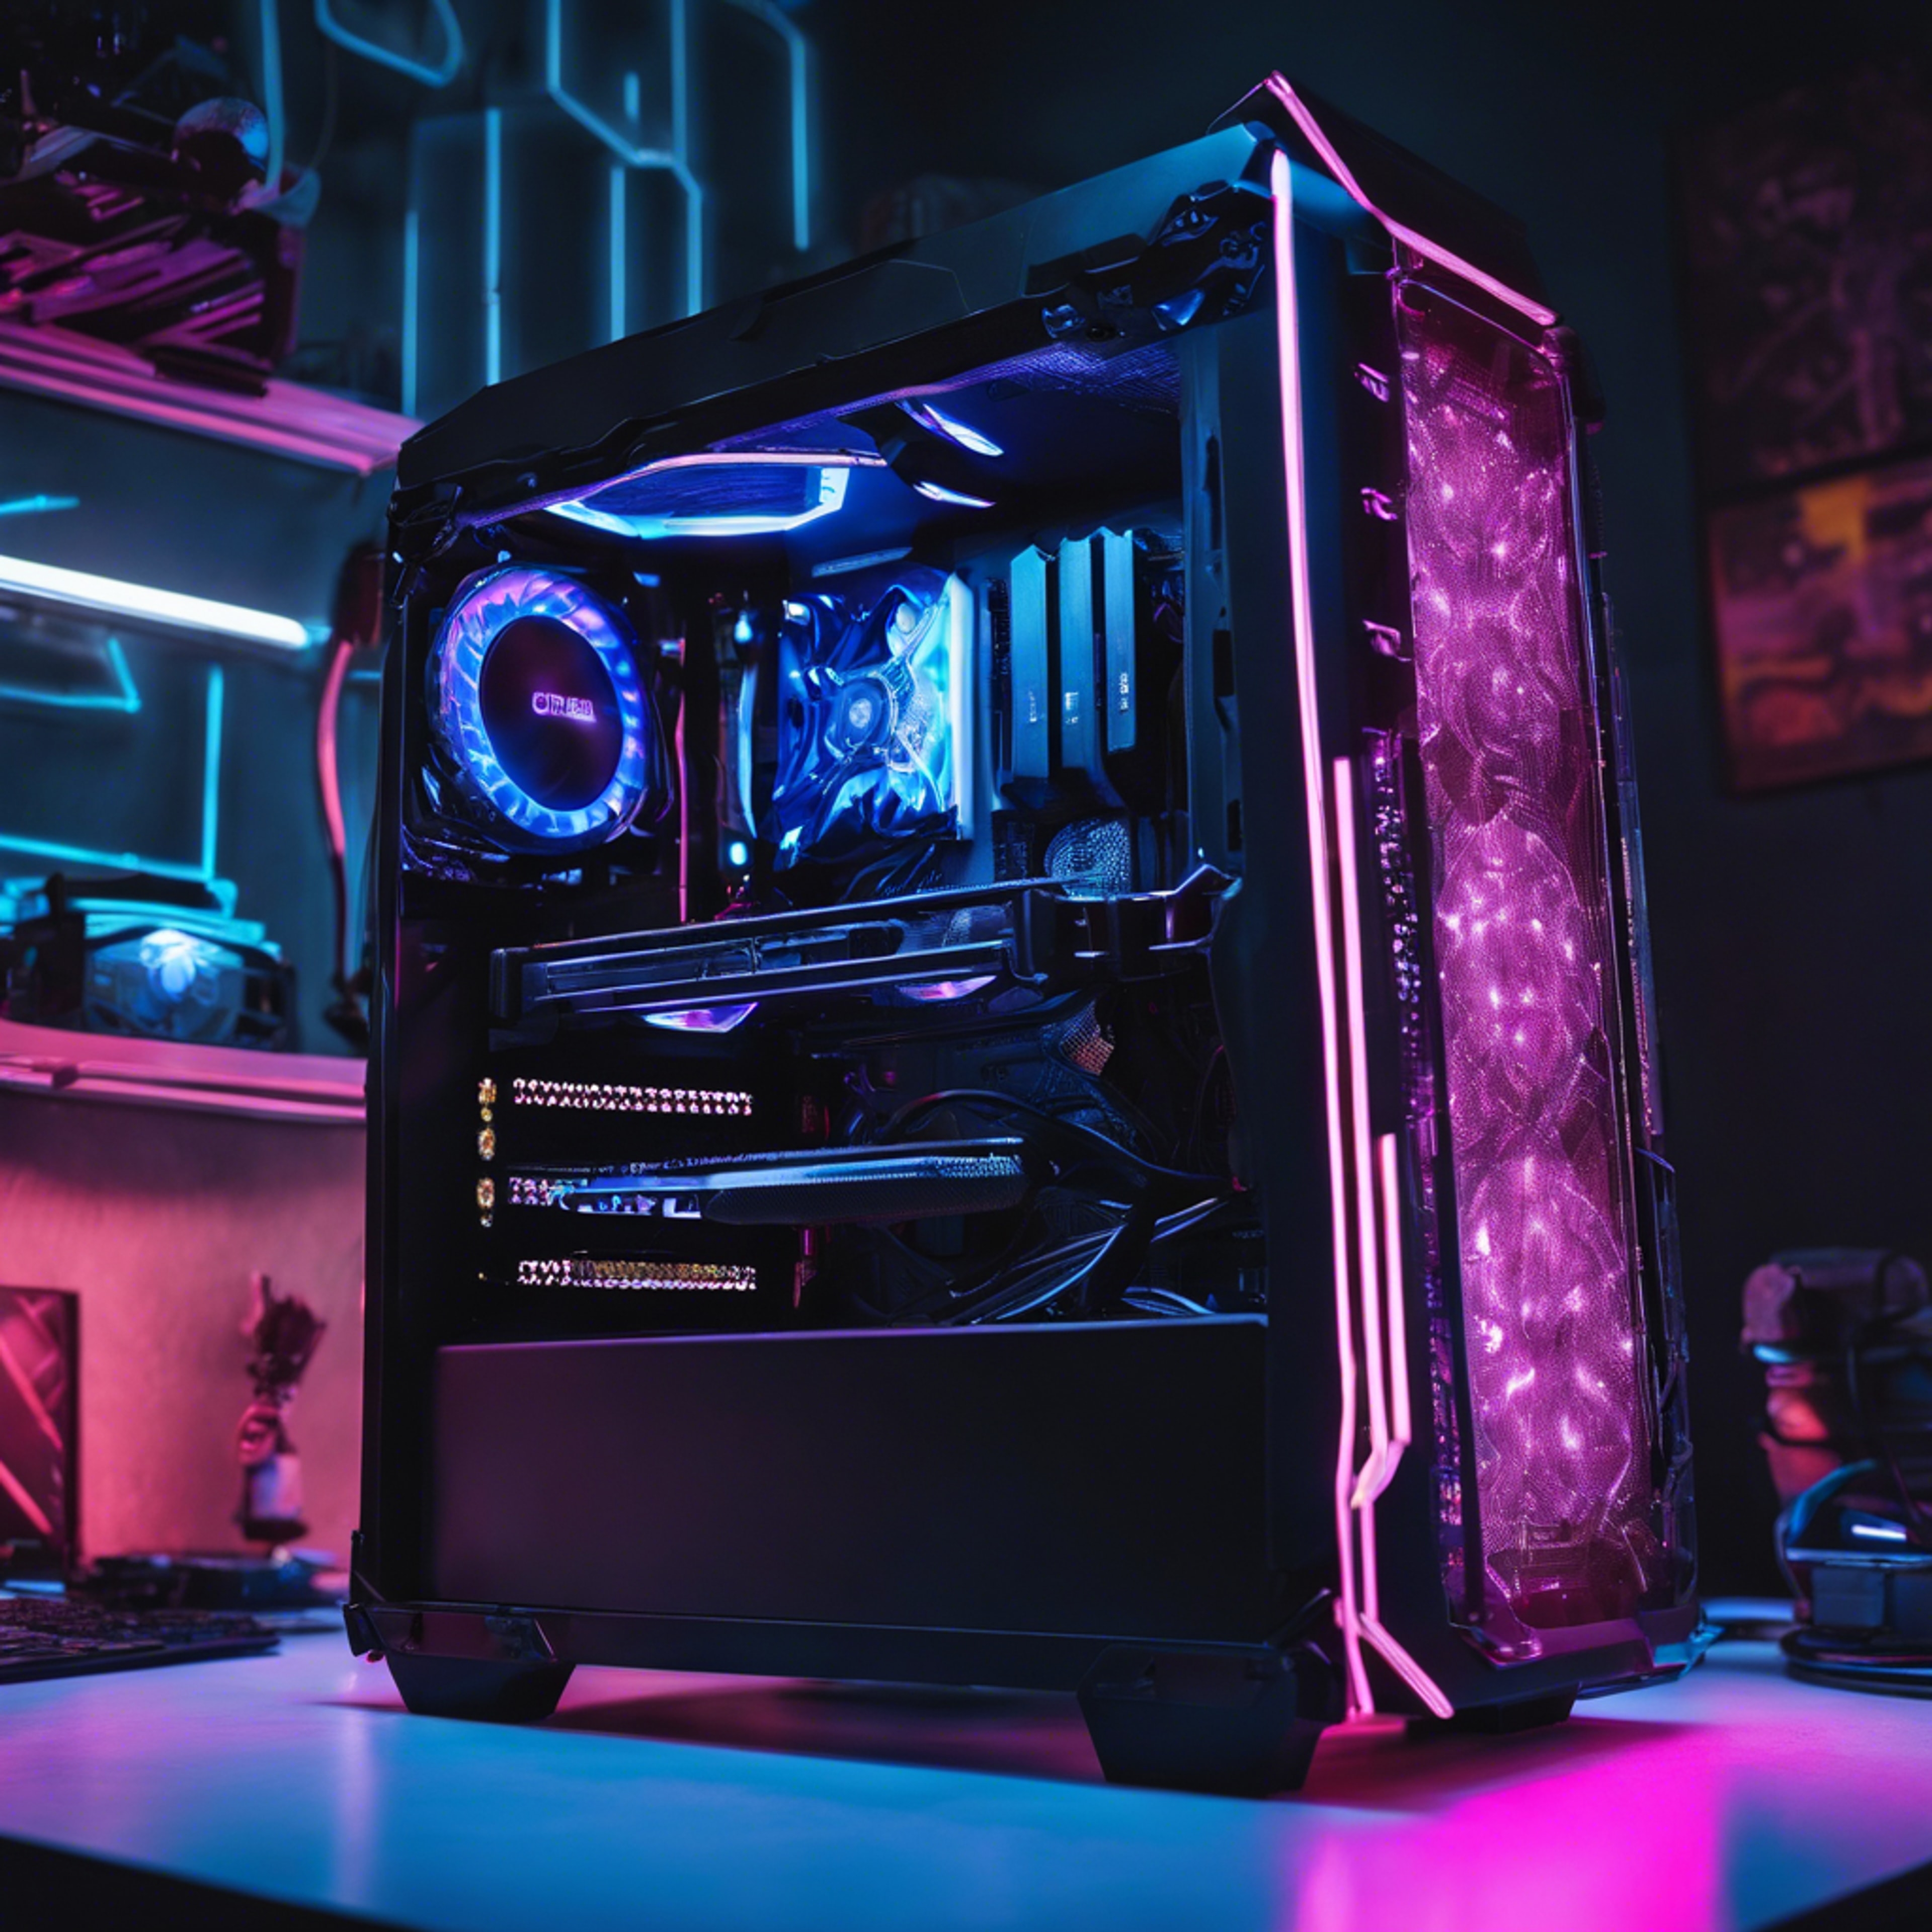 A cyberpunk-style black gaming PC with neon blue LED lights. Валлпапер[4f1d7ee7161d4e2894f4]